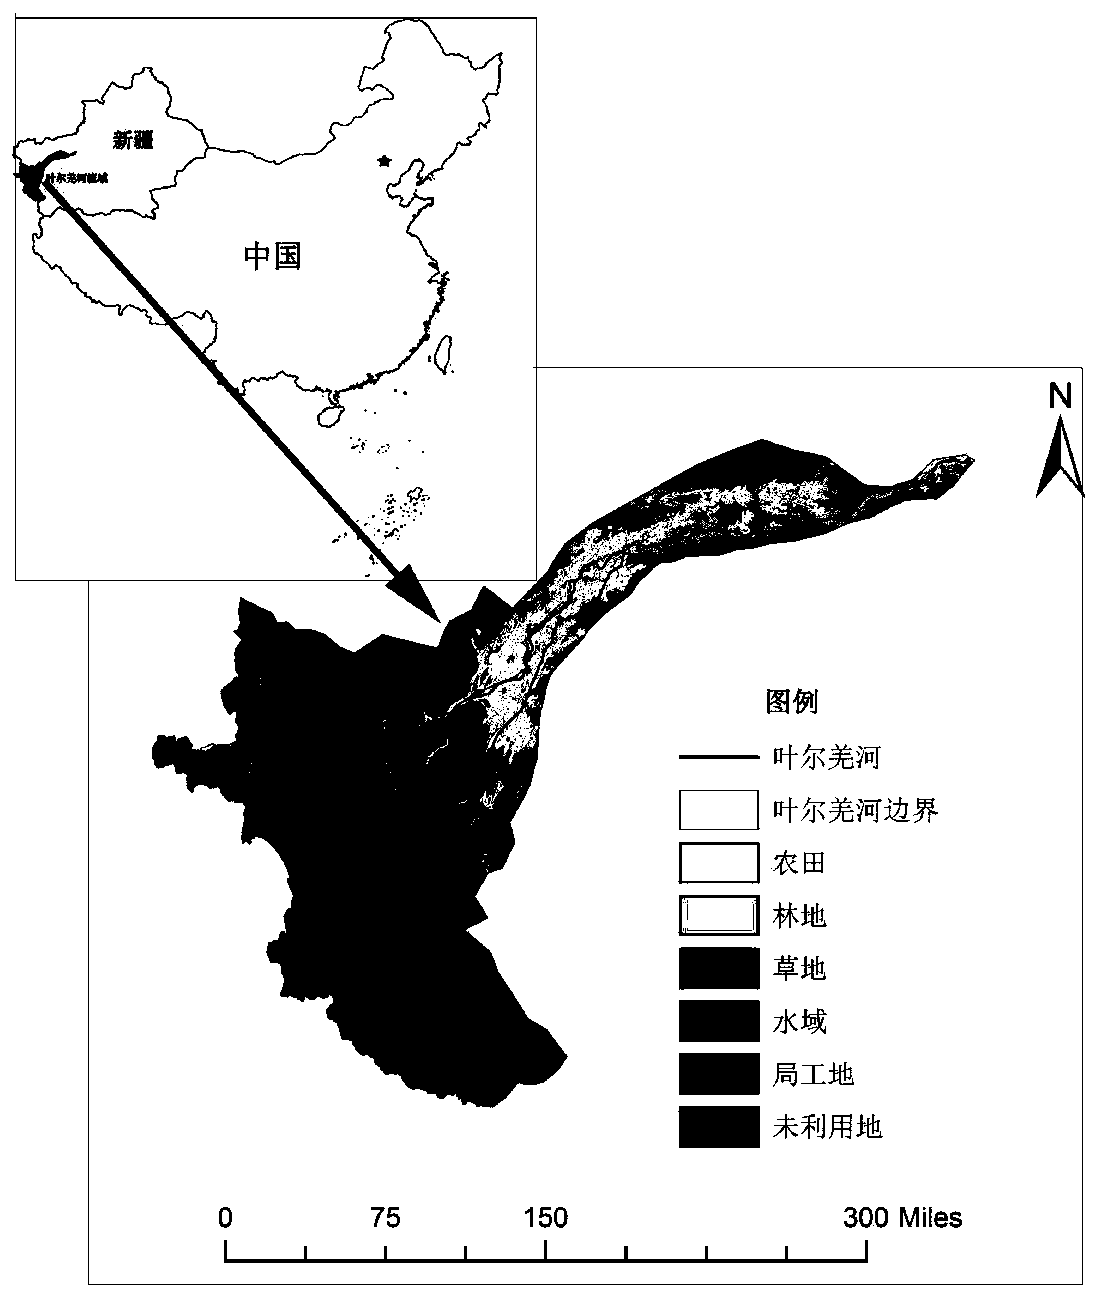 Method for preparing production, living and ecological water for inland river basin in arid area